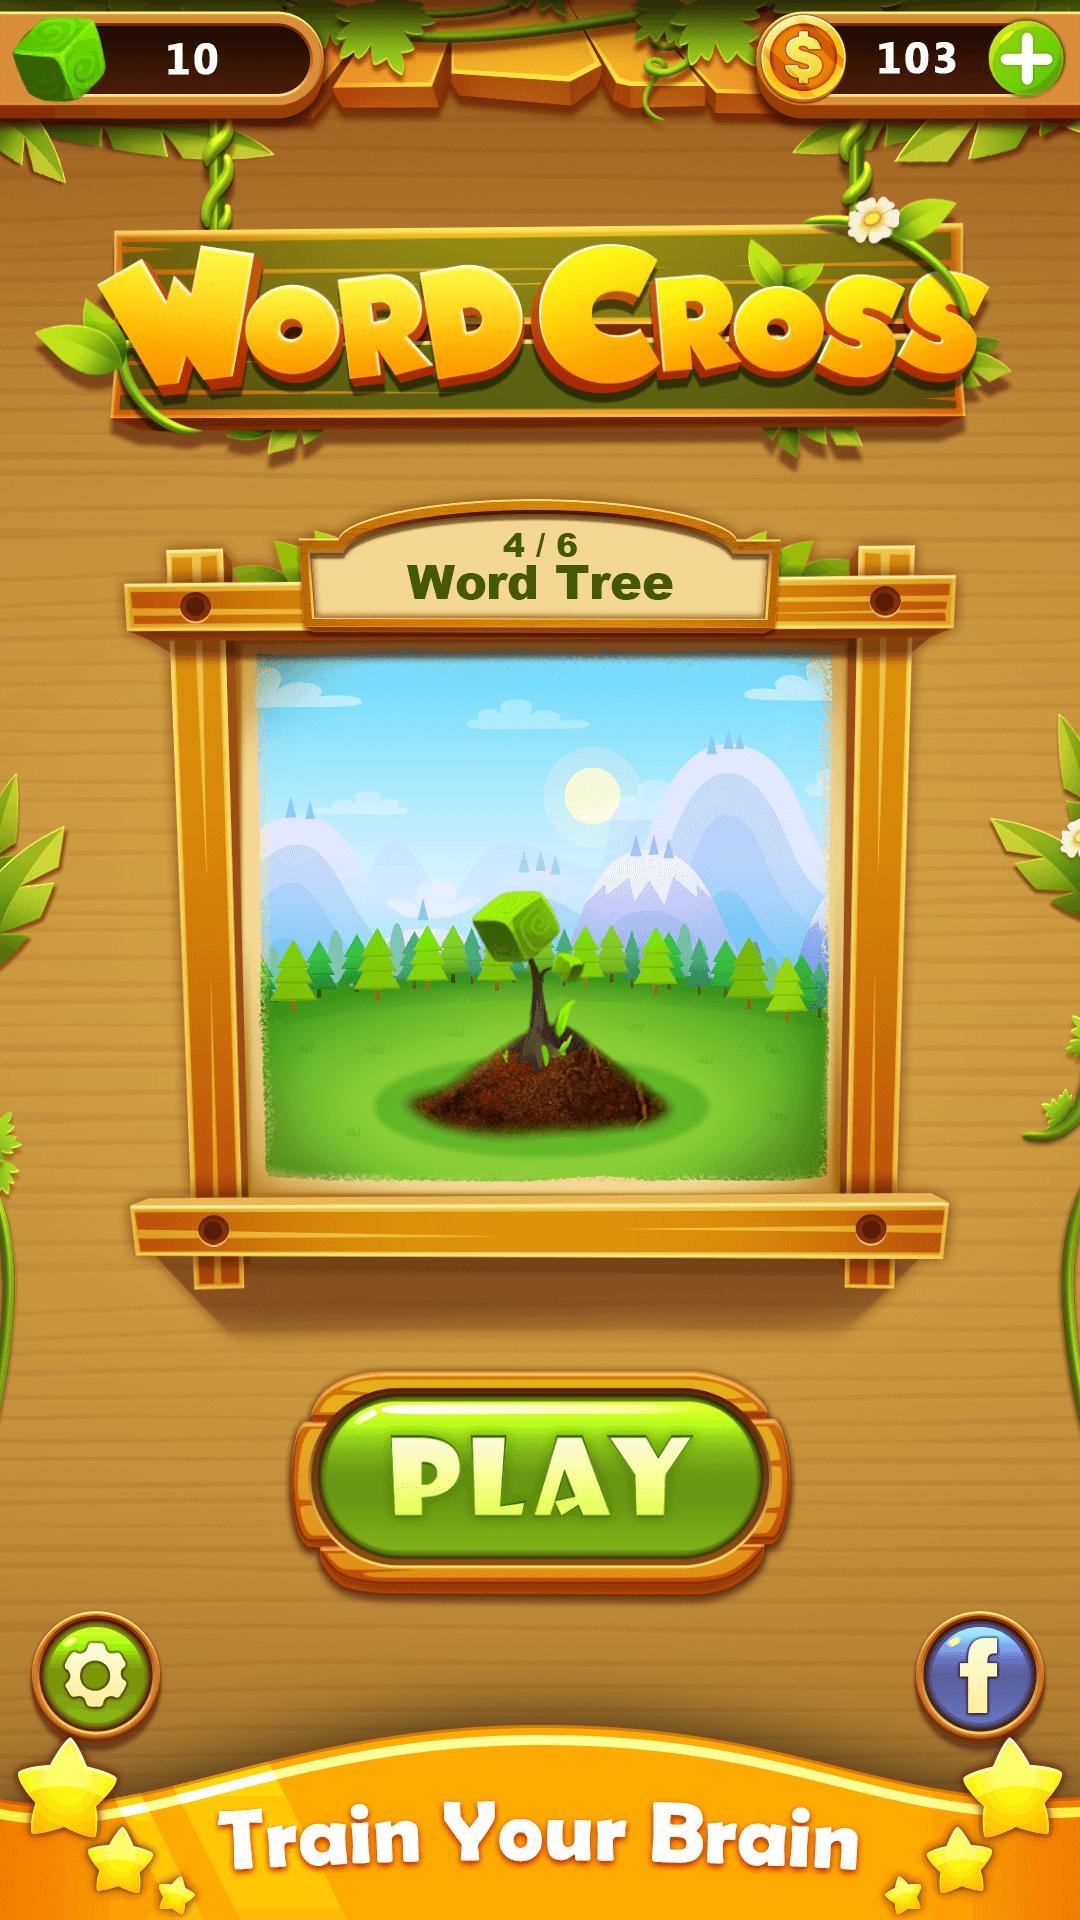 Word Cross Puzzle: Best Free Offline Word Games for Android - APK Download